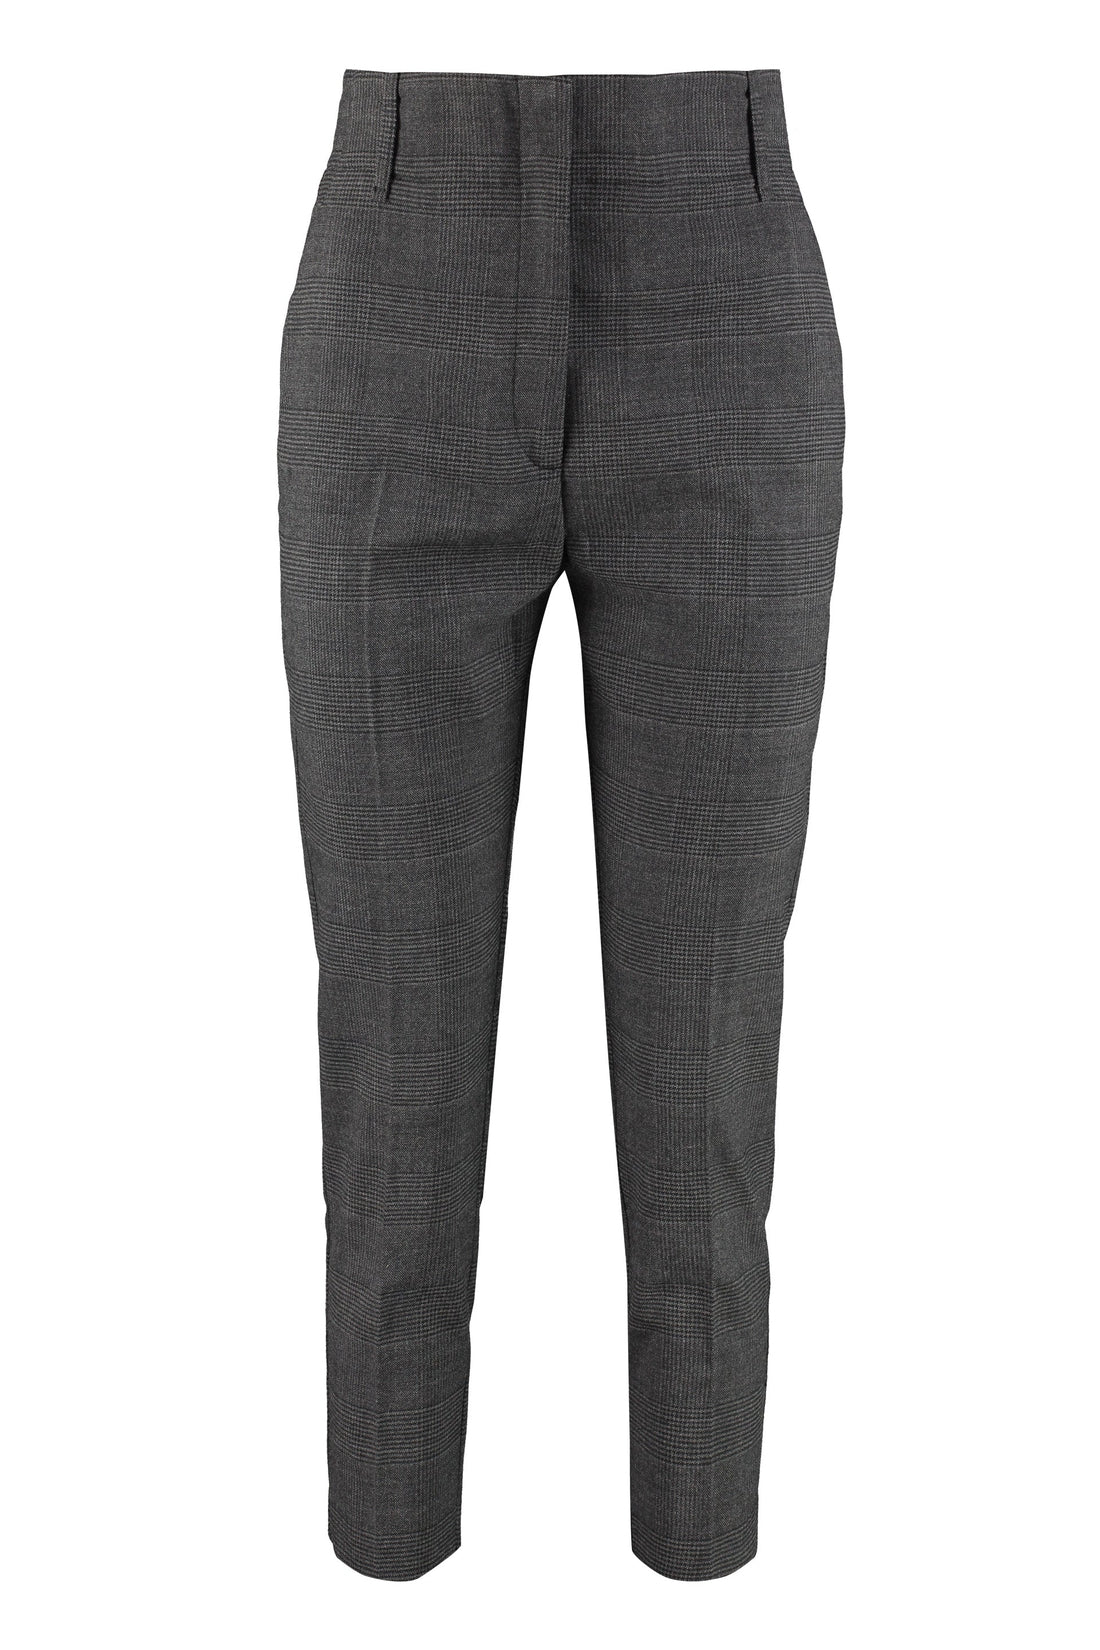 Pinko-OUTLET-SALE-Tenerezza Prince-of-Wales check trousers-ARCHIVIST